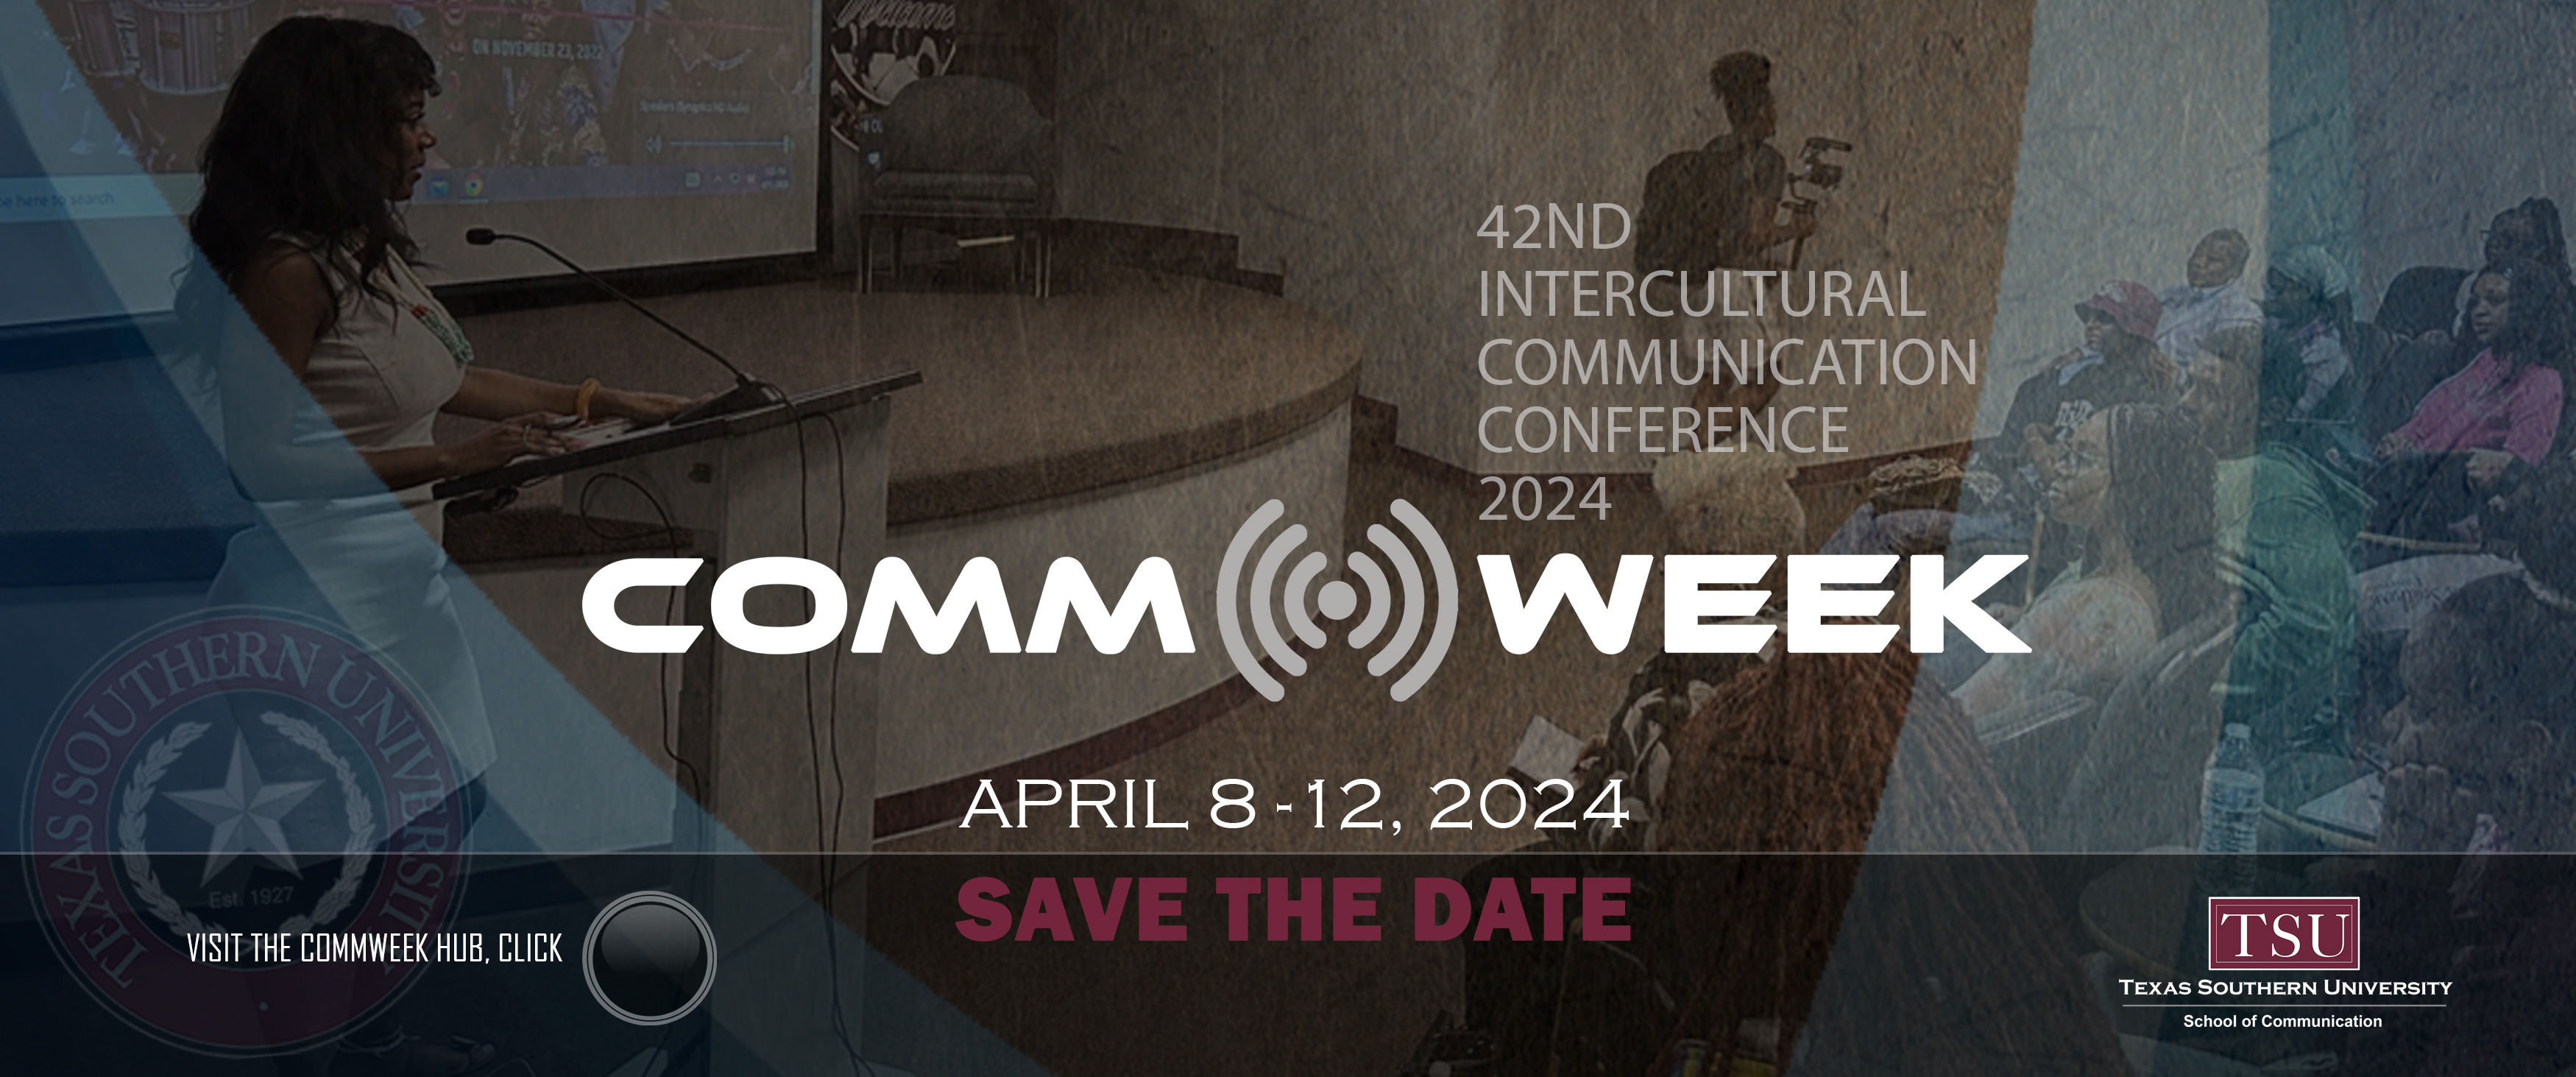 communication week save the date April 8-12, 2023